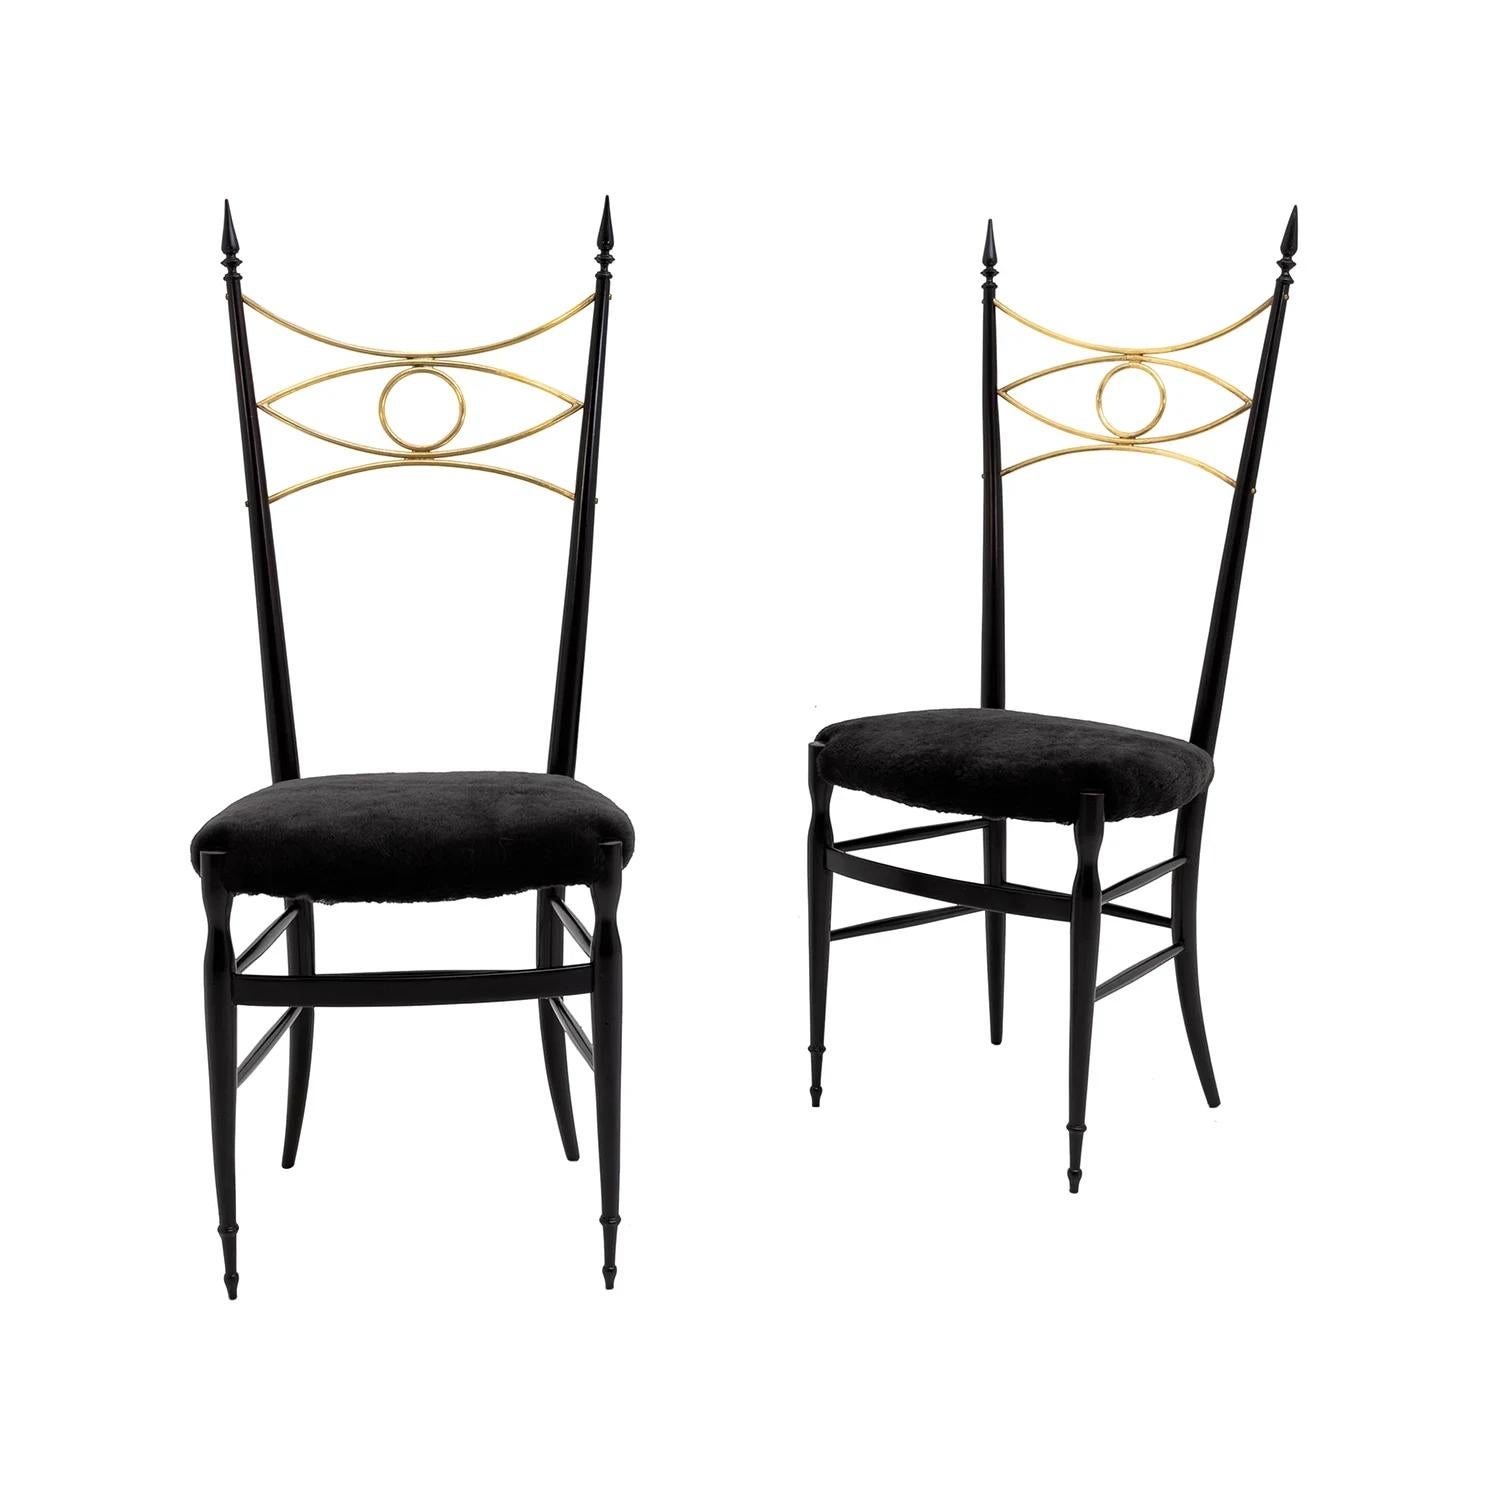 A black-gold, vintage Mid-Century Modern Italian pair of high sculptural dining room chairs made of hand crafted ebonized Rosewood, designed most likely by Paolo Buffa in good condition. The detailed crafted side chairs are particularized with an